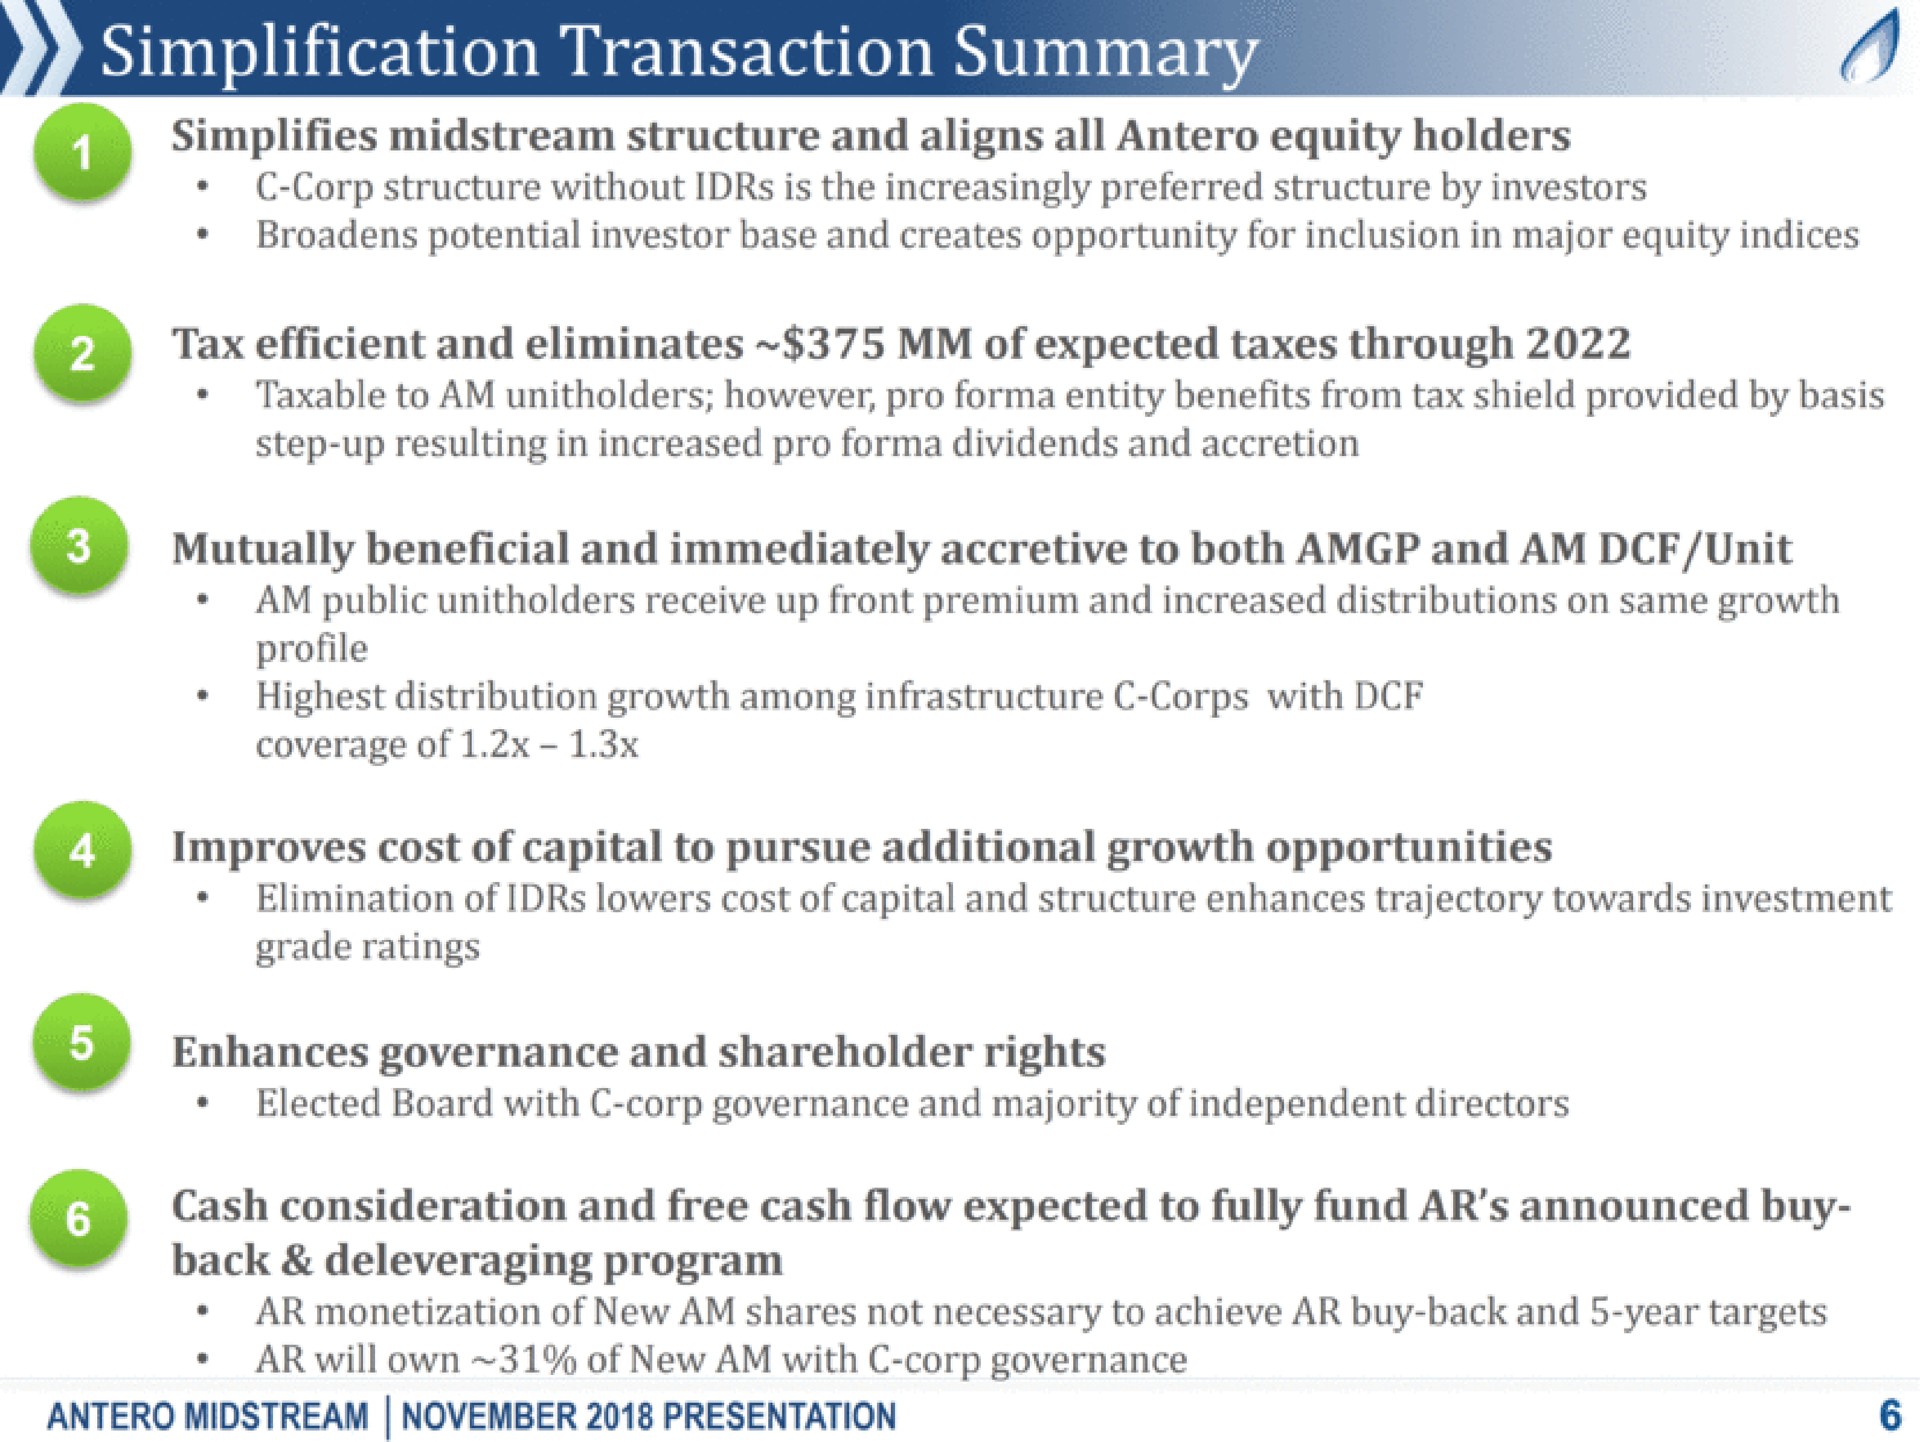 simplification transaction summary simplifies midstream structure and aligns all equity holders corp structure without is the increasingly preferred structure by investors broadens potential investor base and creates opportunity for inclusion in major equity indices tax efficient and eliminates of expected taxes through taxable to am however pro entity benefits from tax shield provided by basis step up resulting in increased pro dividends and accretion mutually beneficial and immediately accretive to both and am unit am public receive up front premium and increased distributions on same growth profile highest distribution growth among infrastructure corps with coverage of improves cost of capital to pursue additional growth opportunities elimination of lowers cost of capital and structure enhances trajectory towards investment grade ratings enhances governance and shareholder rights elected board with corp governance and majority of independent directors cash consideration and free cash flow expected to fully fund announced buy back program monetization of new am shares not necessary to achieve buy back and year targets will own of new am with corp governance midstream presentation | Antero Midstream Partners